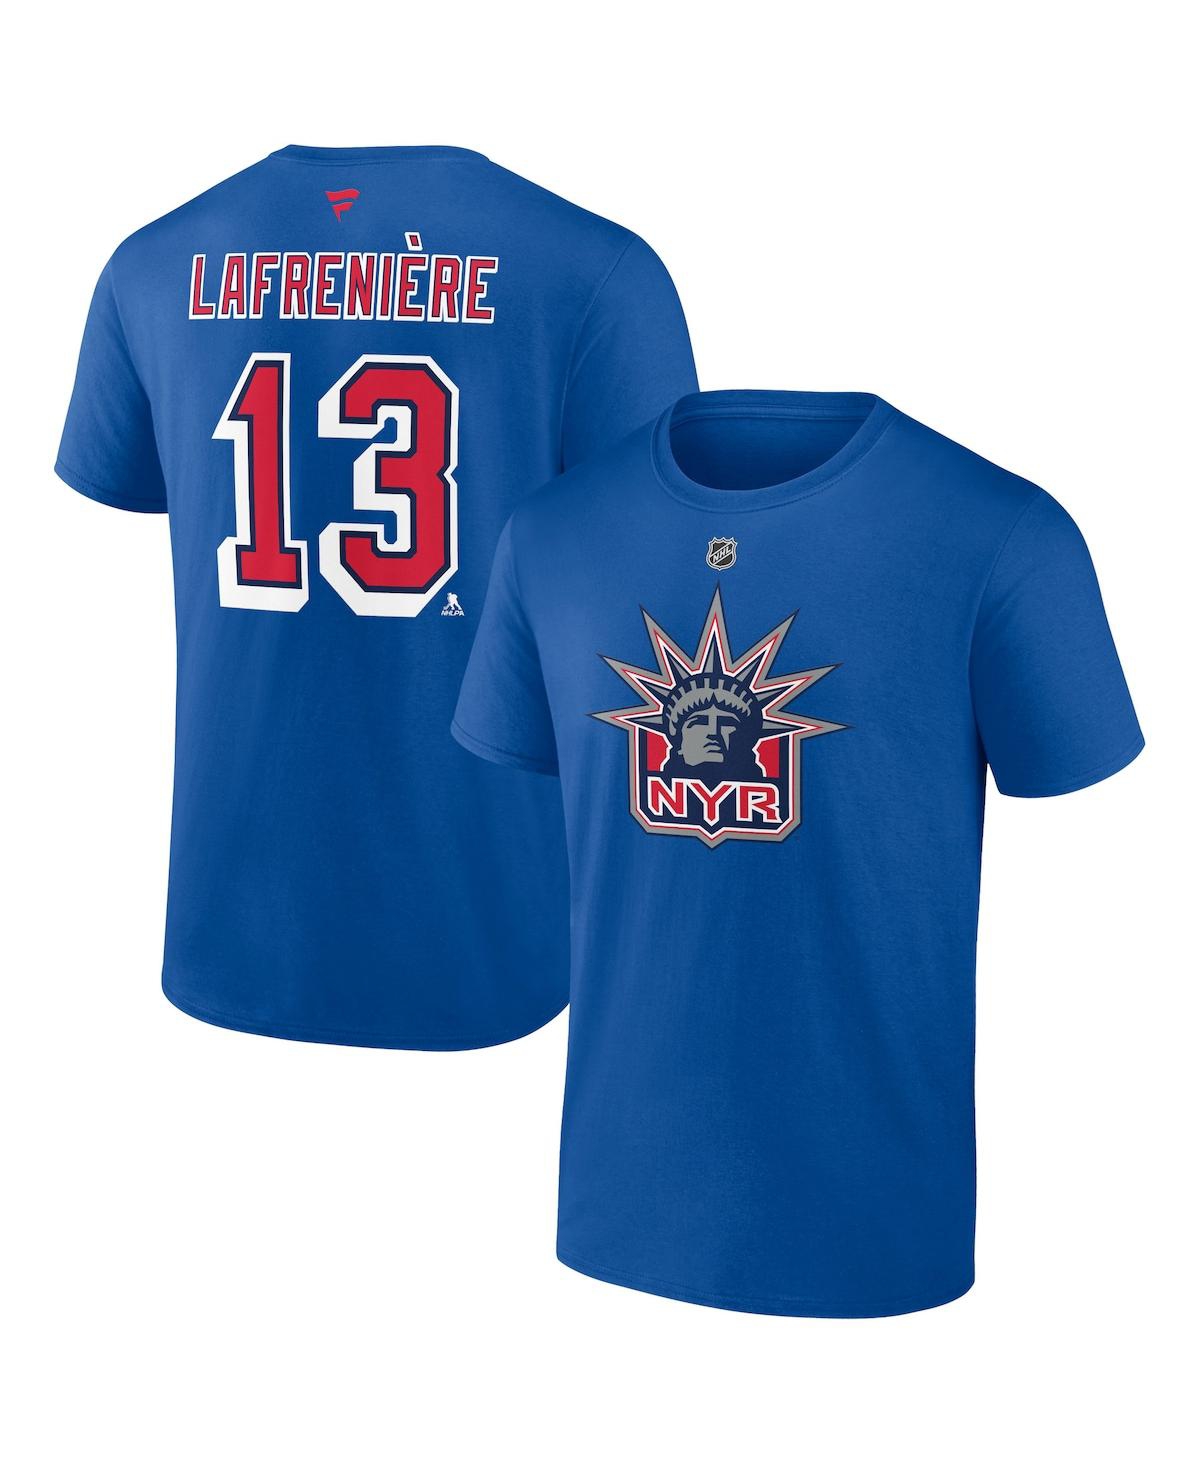 FANATICS MEN'S FANATICS ALEXIS LAFRENIERE ROYAL NEW YORK RANGERS SPECIAL EDITION 2.0 NAME AND NUMBER T-SHIRT